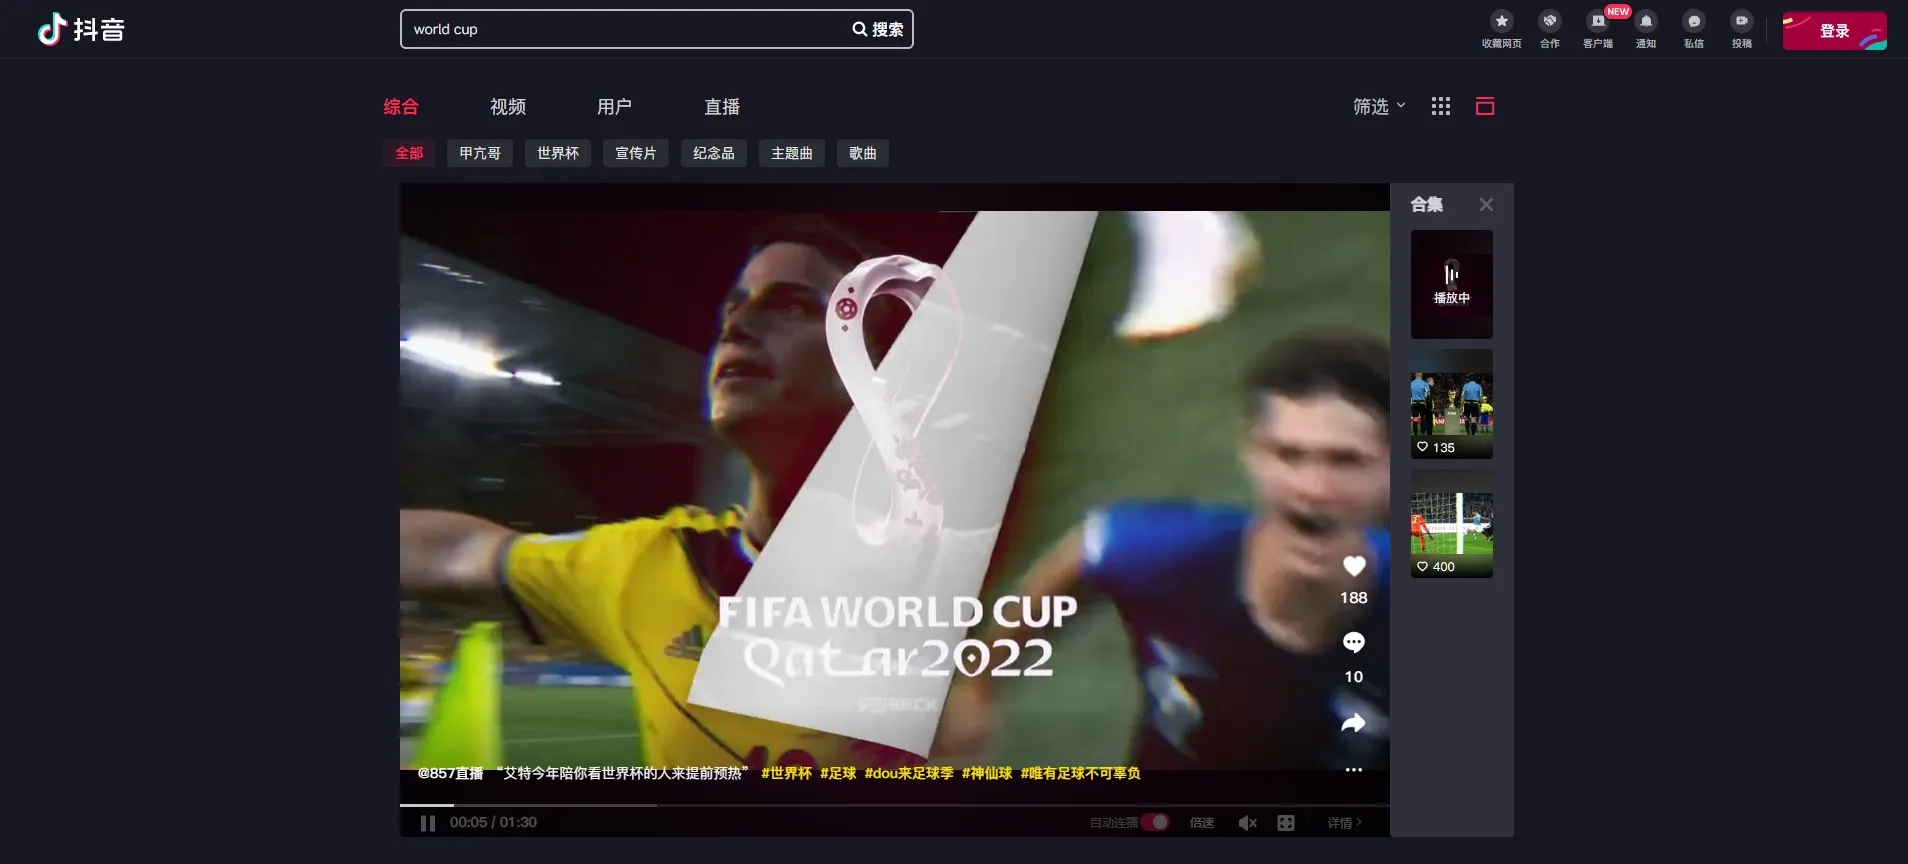 douyin interface, 'world cup' search results